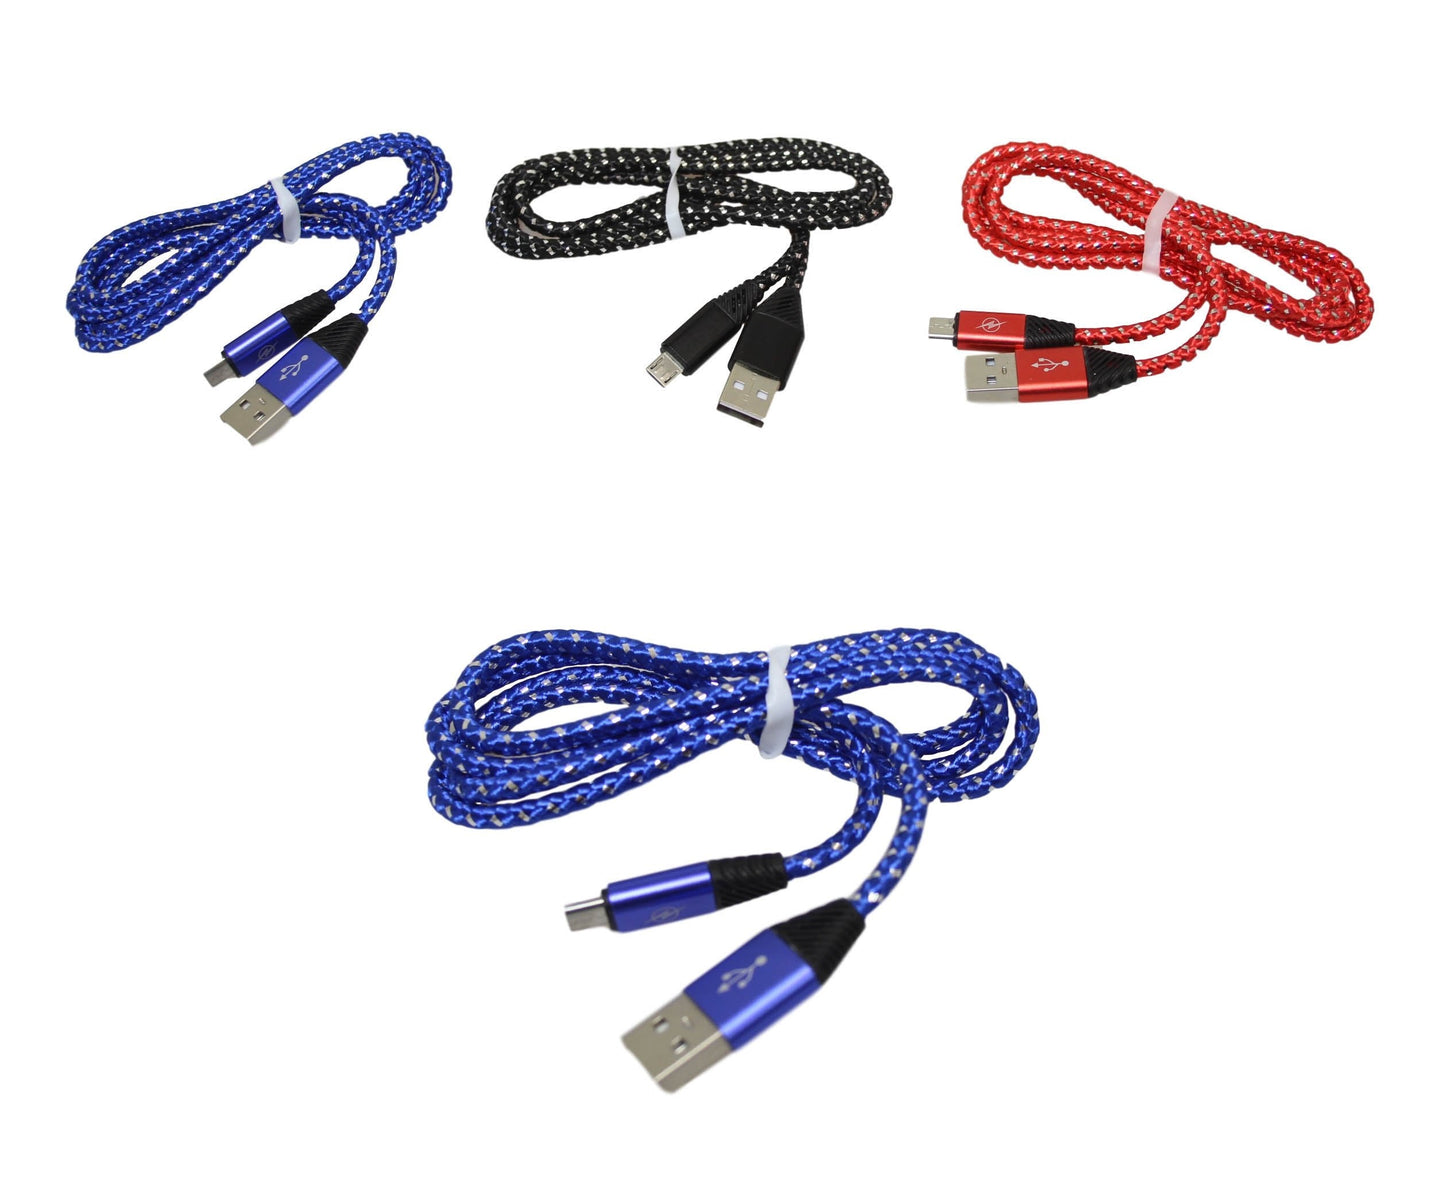 Assorted Colour Data Line Charging Sync Cable Android Phone Charging x 1 6388 (Large Letter Rate)